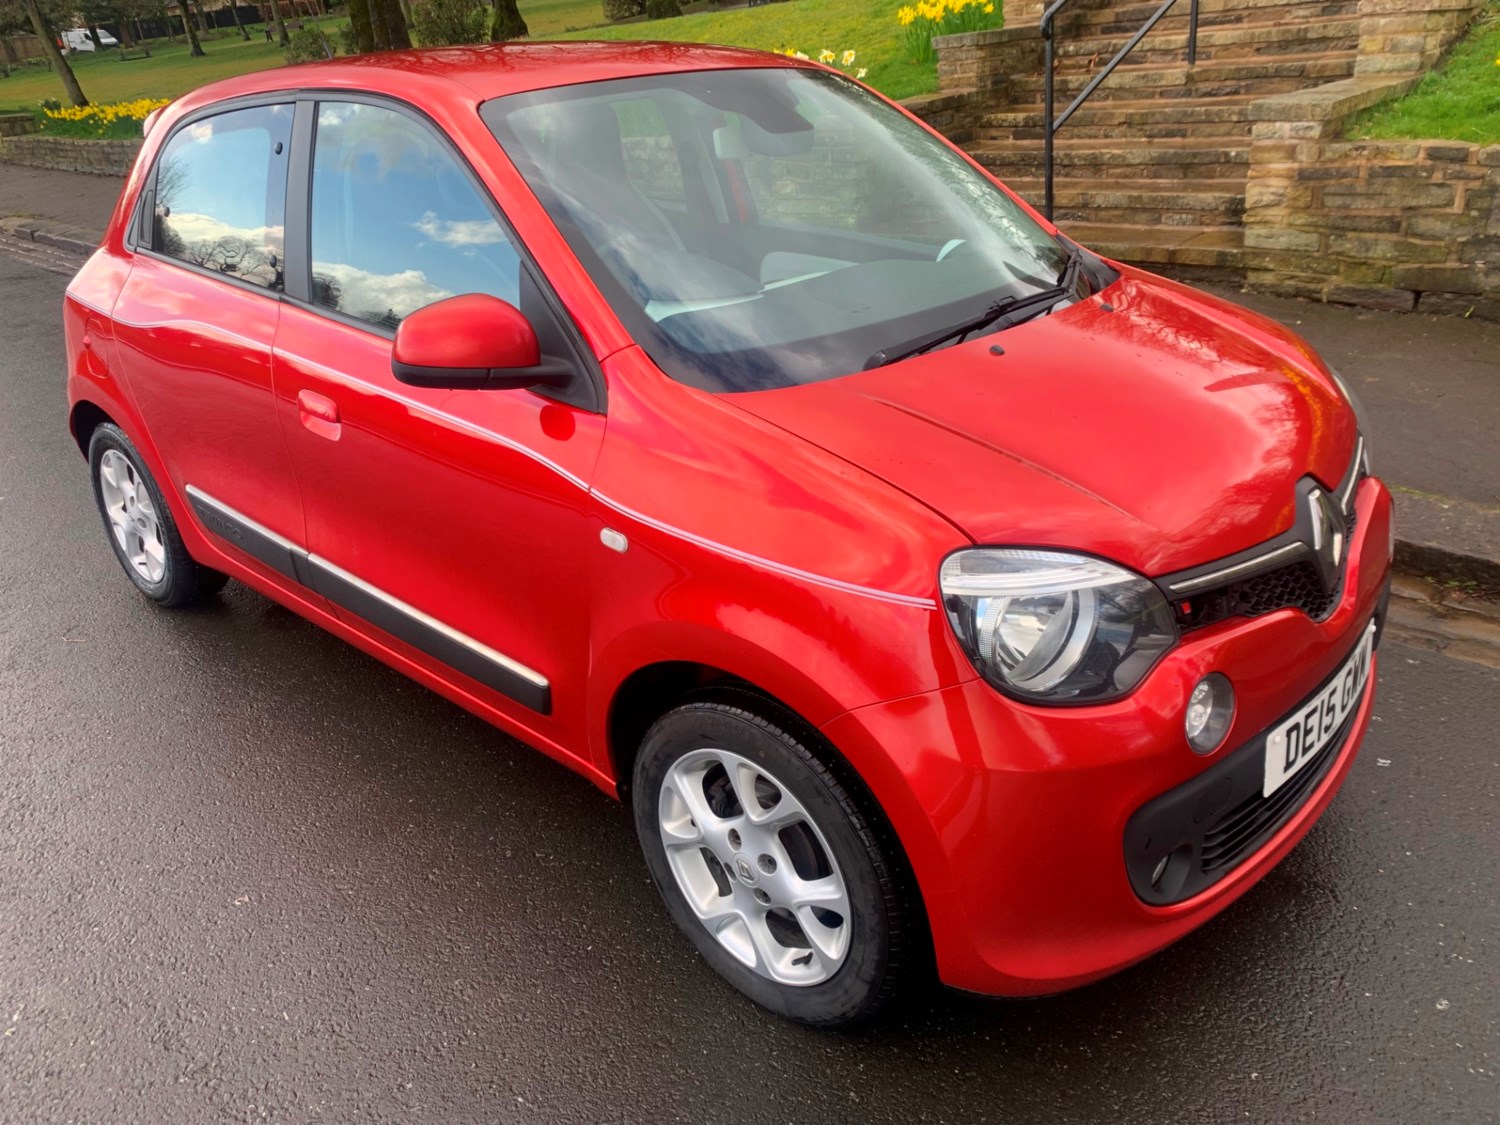 Used Renault Twingo 0.9 litre for Sale - RAC Cars